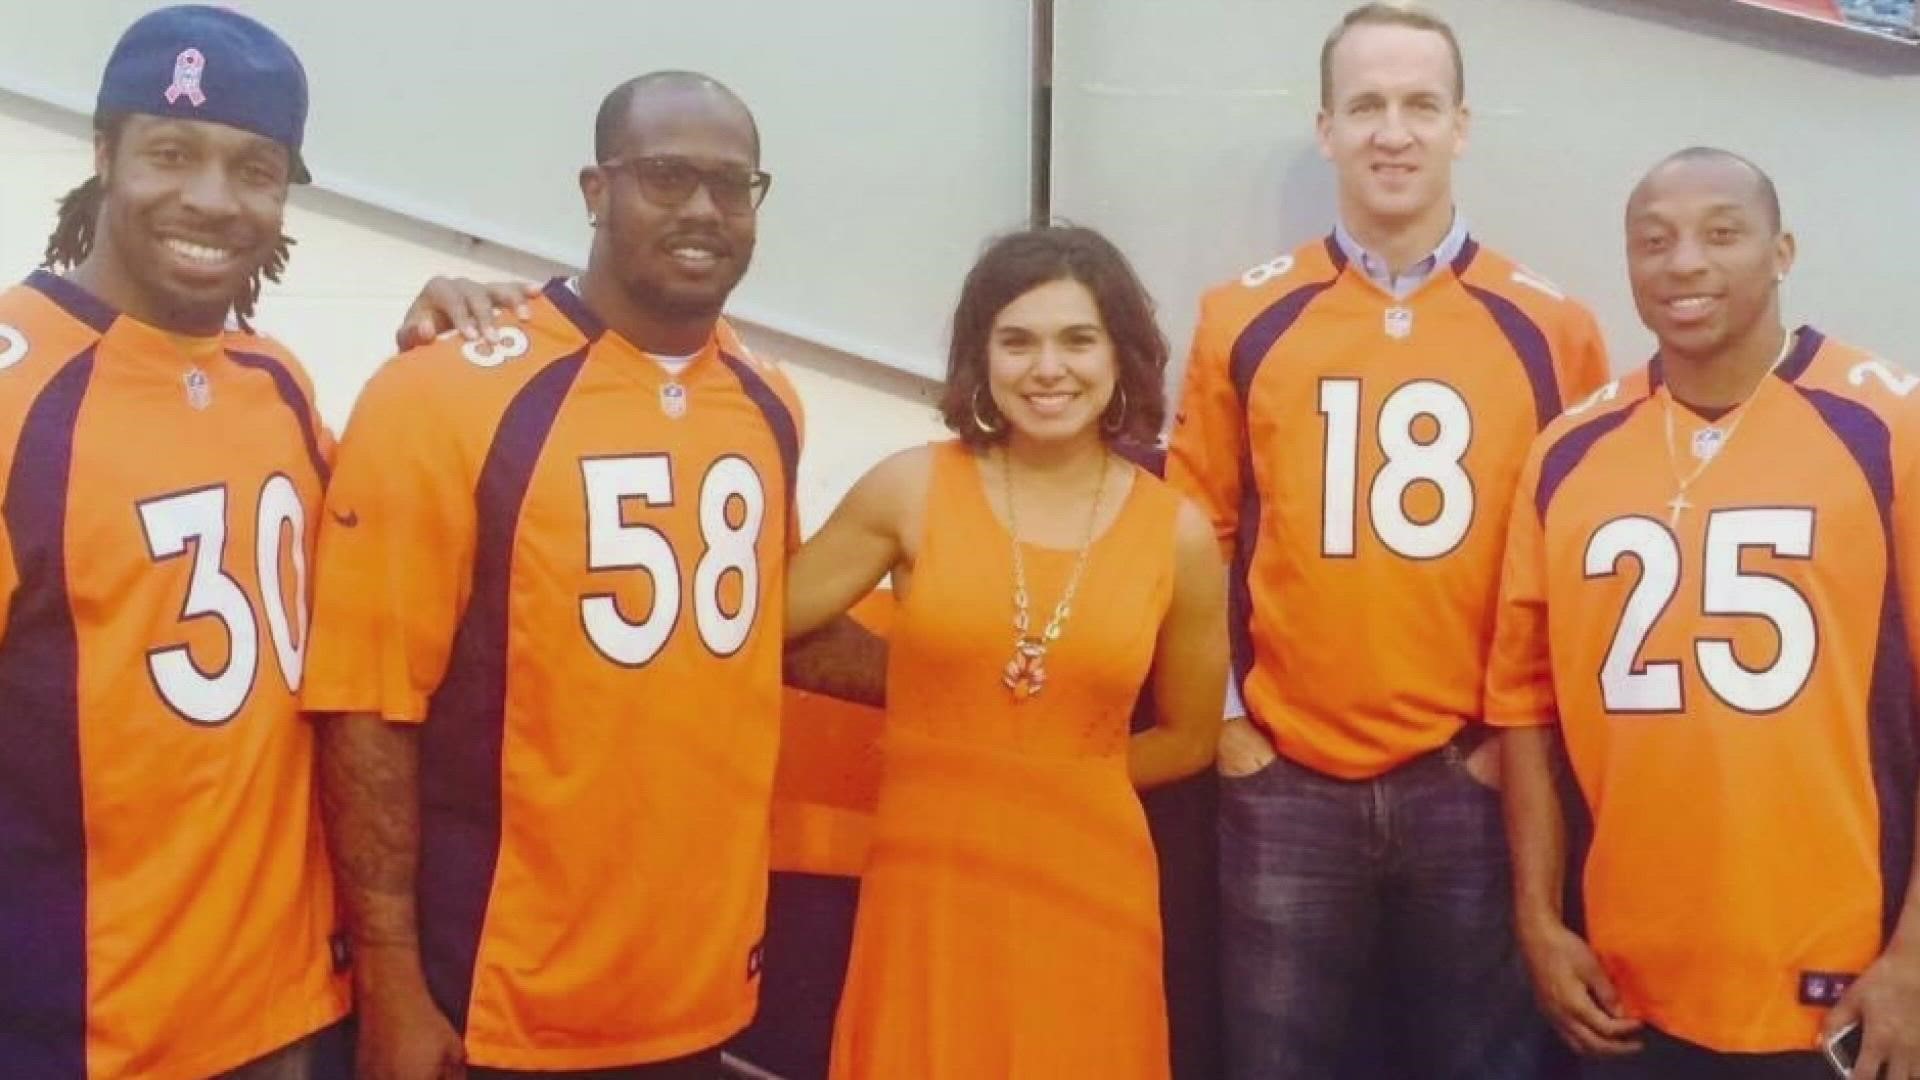 Former Colorado meteorologist Belen De Leon is set to perform the national anthem before "Sunday Night Football" in Denver.